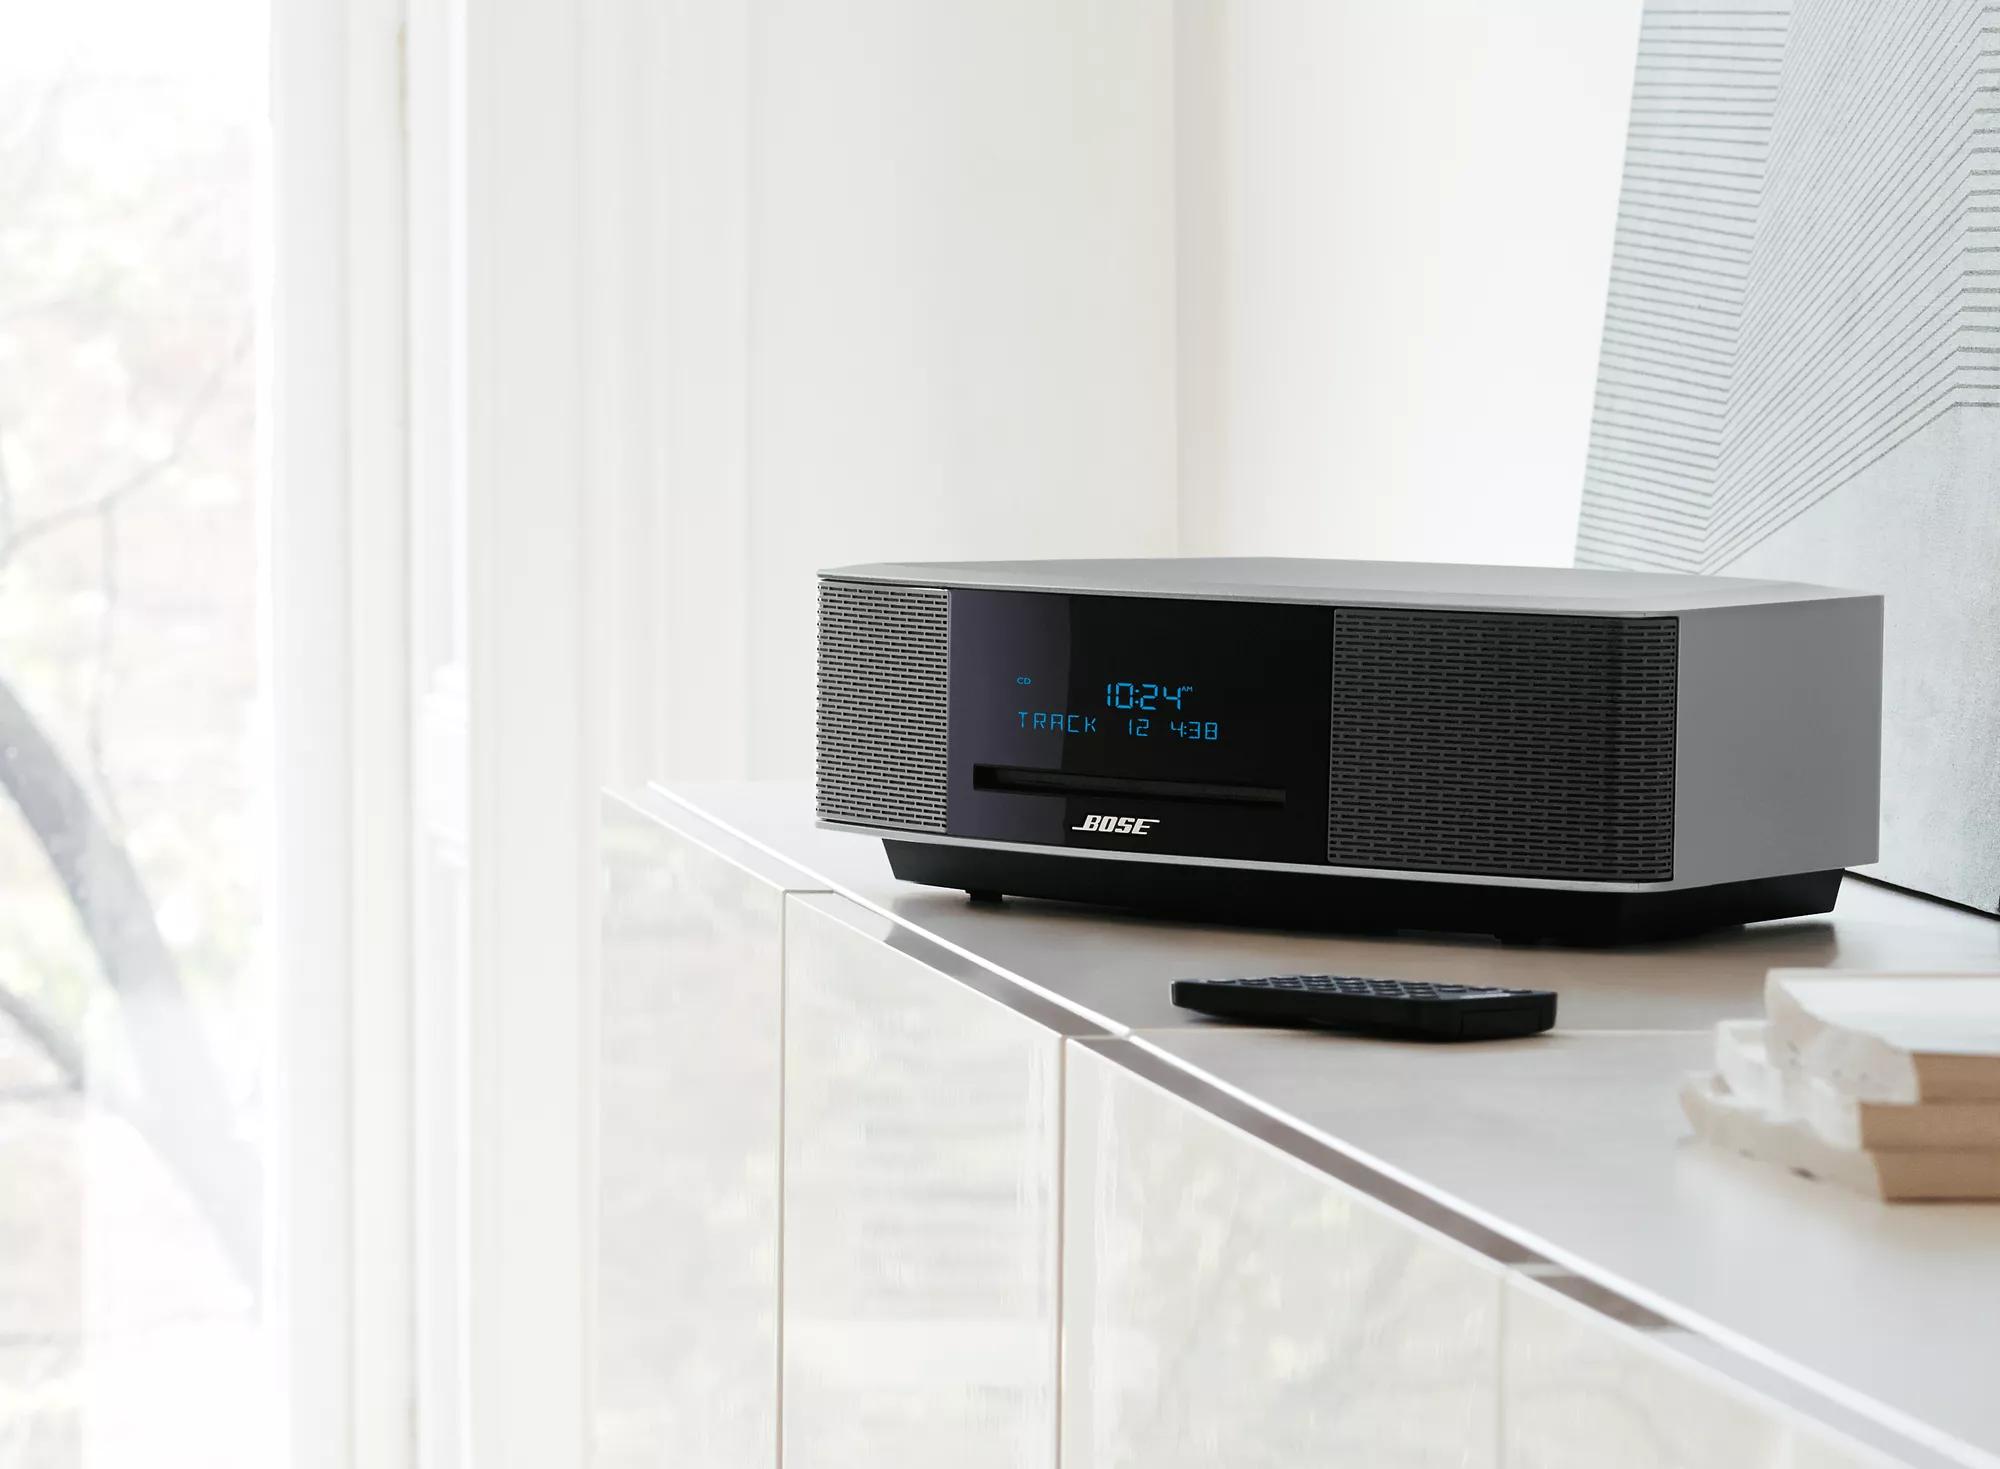 How Much Does A Bose Stereo System Cost